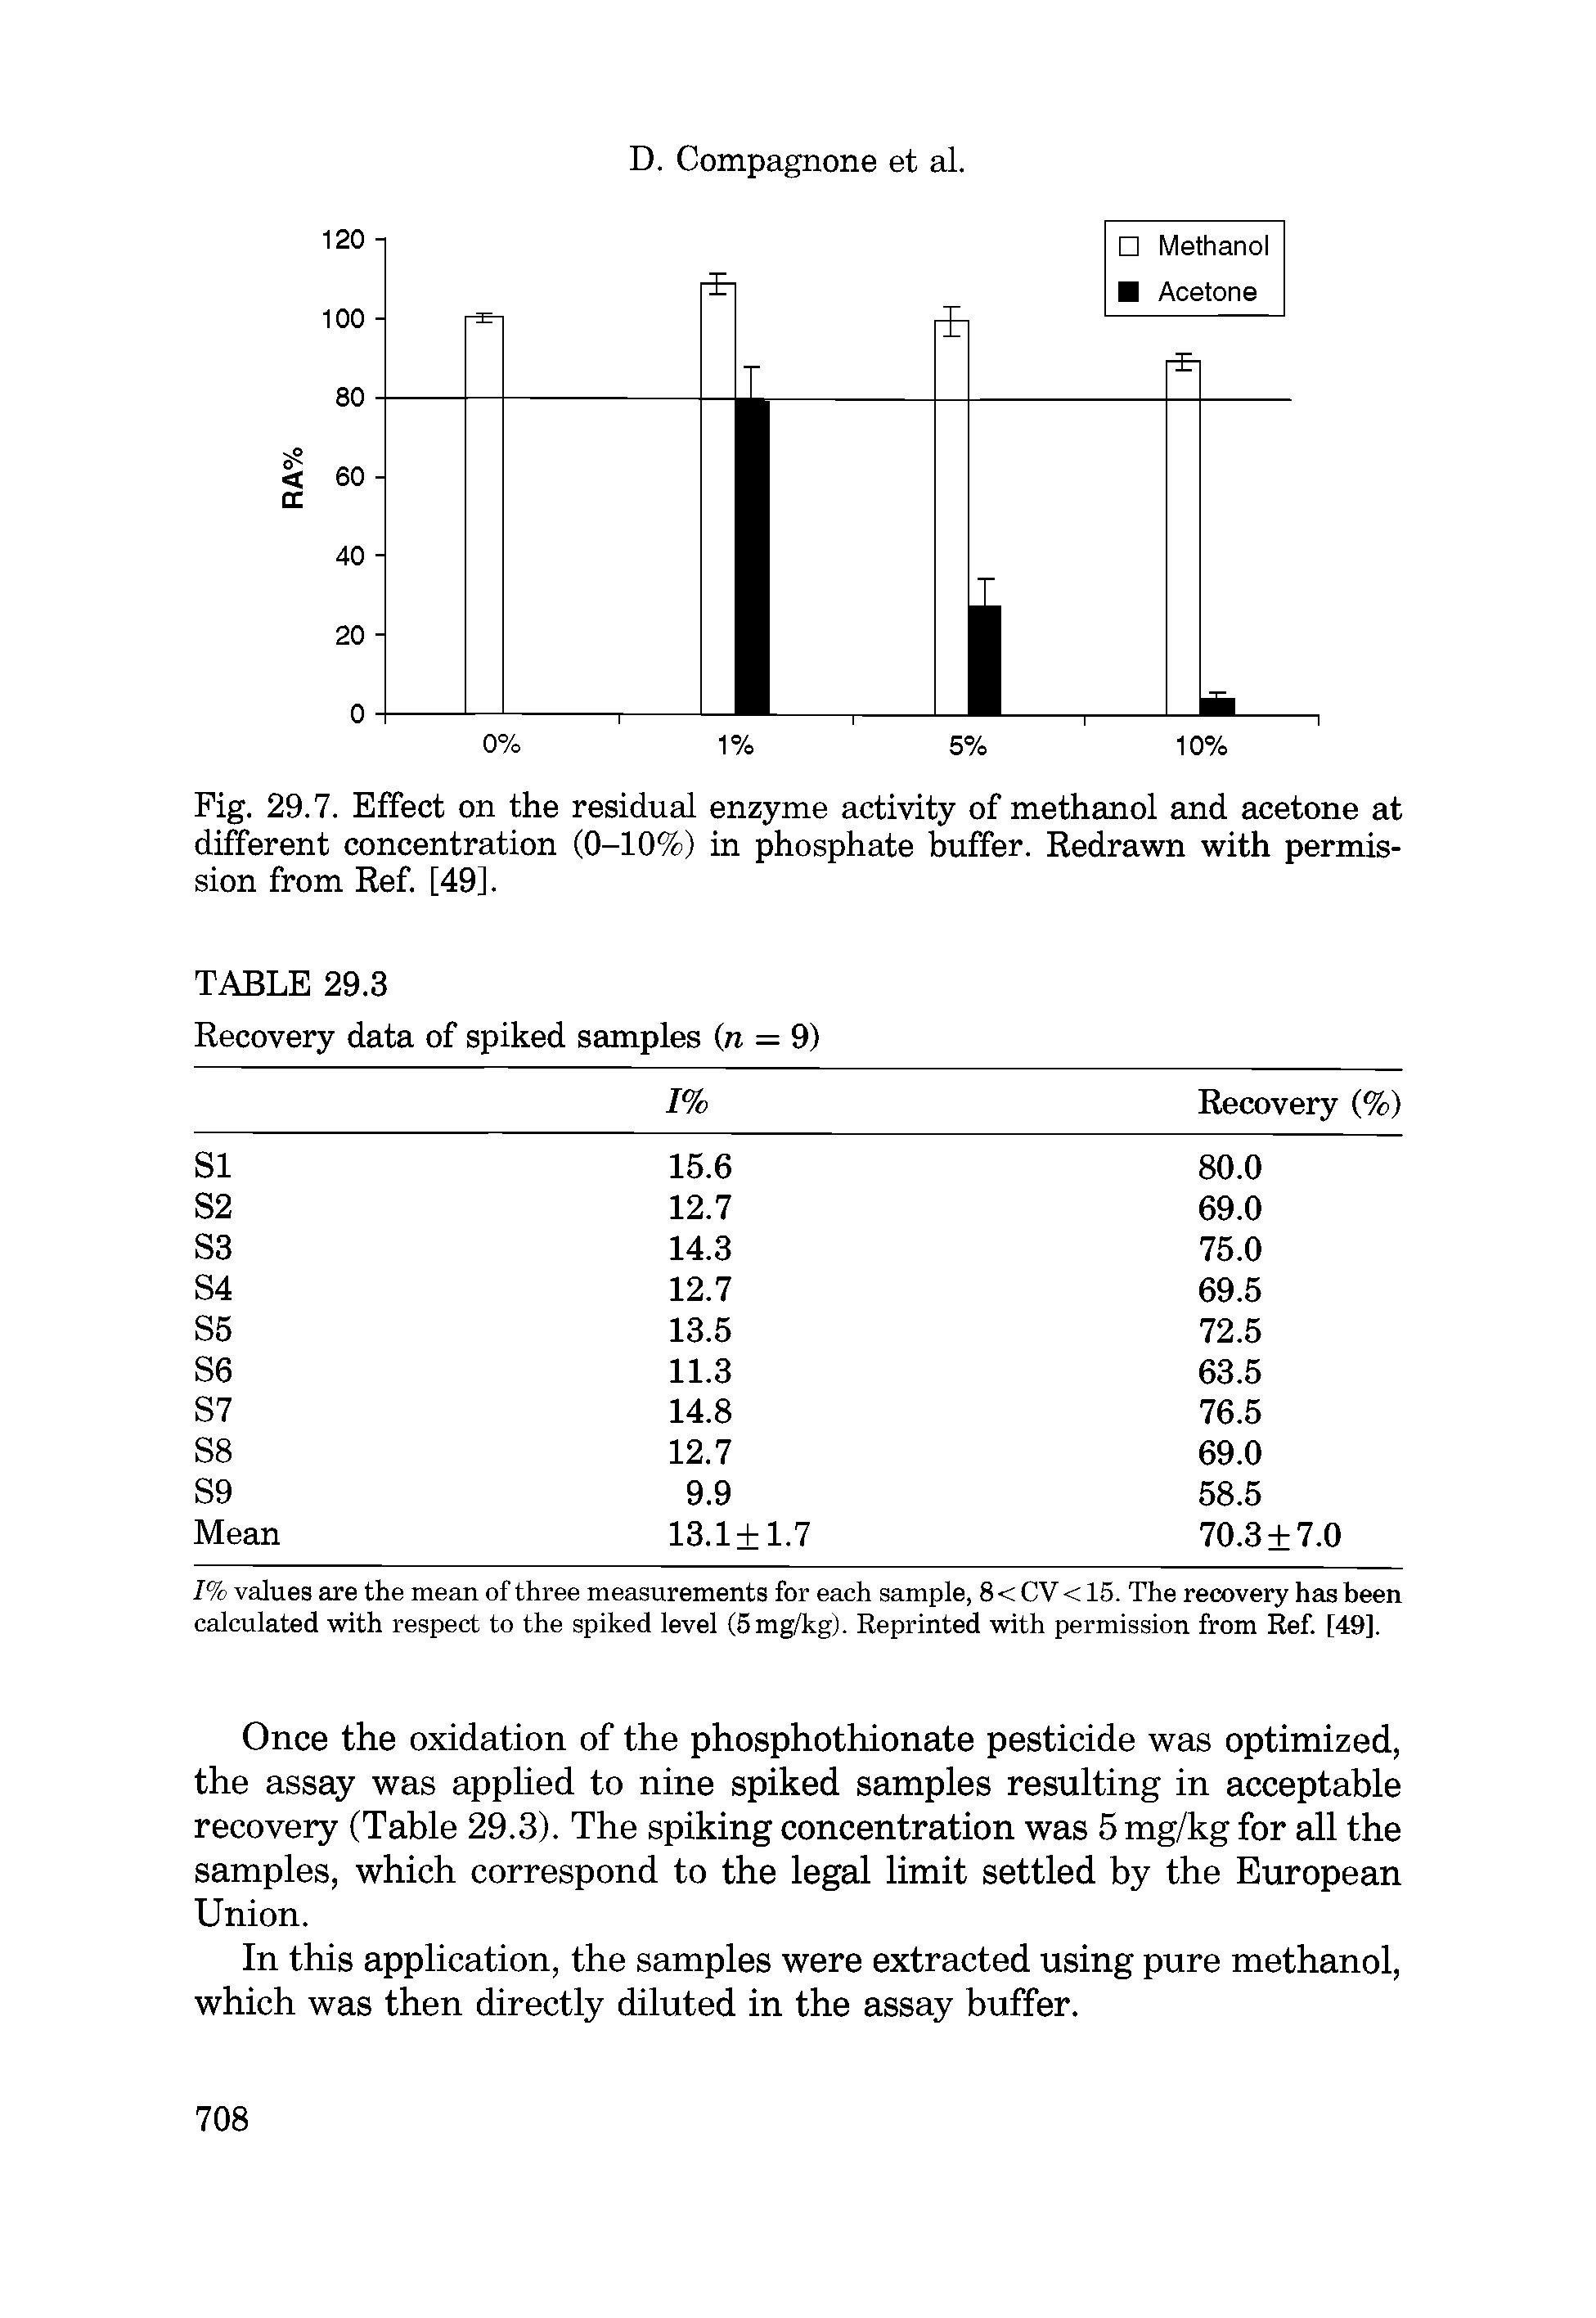 Fig. 29.7. Effect on the residual enzyme activity of methanol and acetone at different concentration (0-10%) in phosphate buffer. Redrawn with permission from Ref. [49].